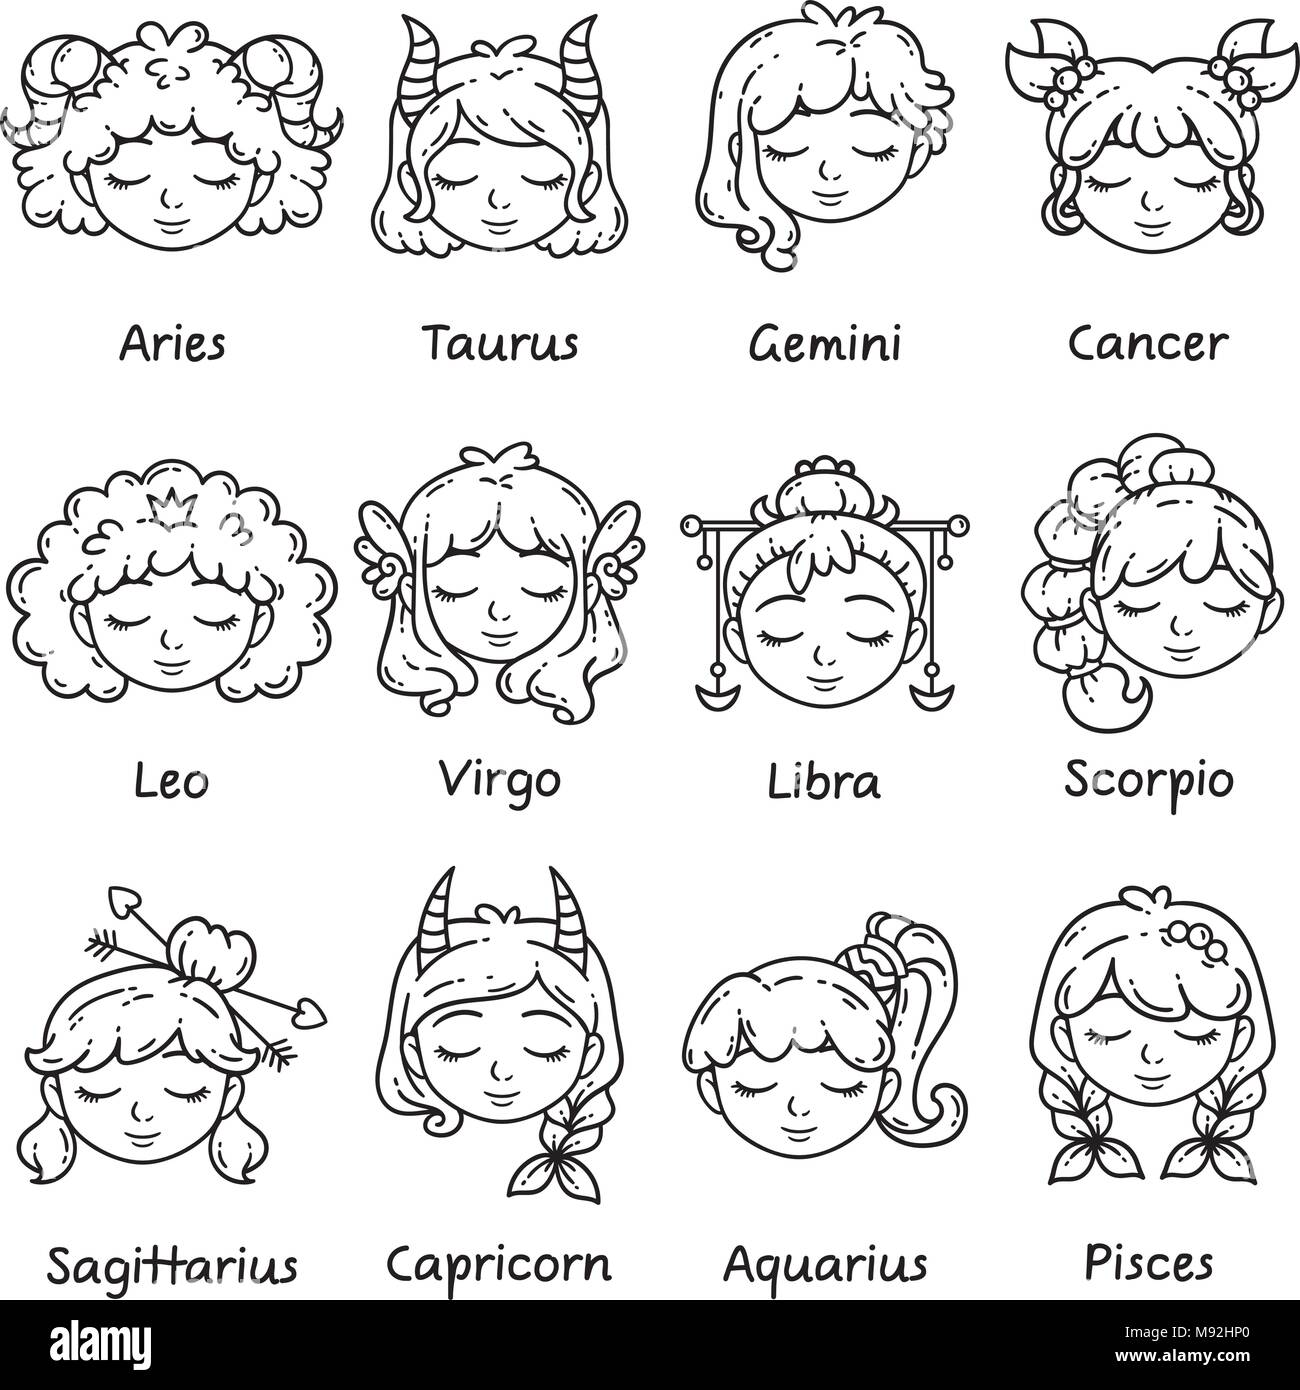 Set of horoscope signs as women. Zodiac for girls. Vector illustration of astrological signs. Girls with closed eyes. Black and white illustration. Ou Stock Vector